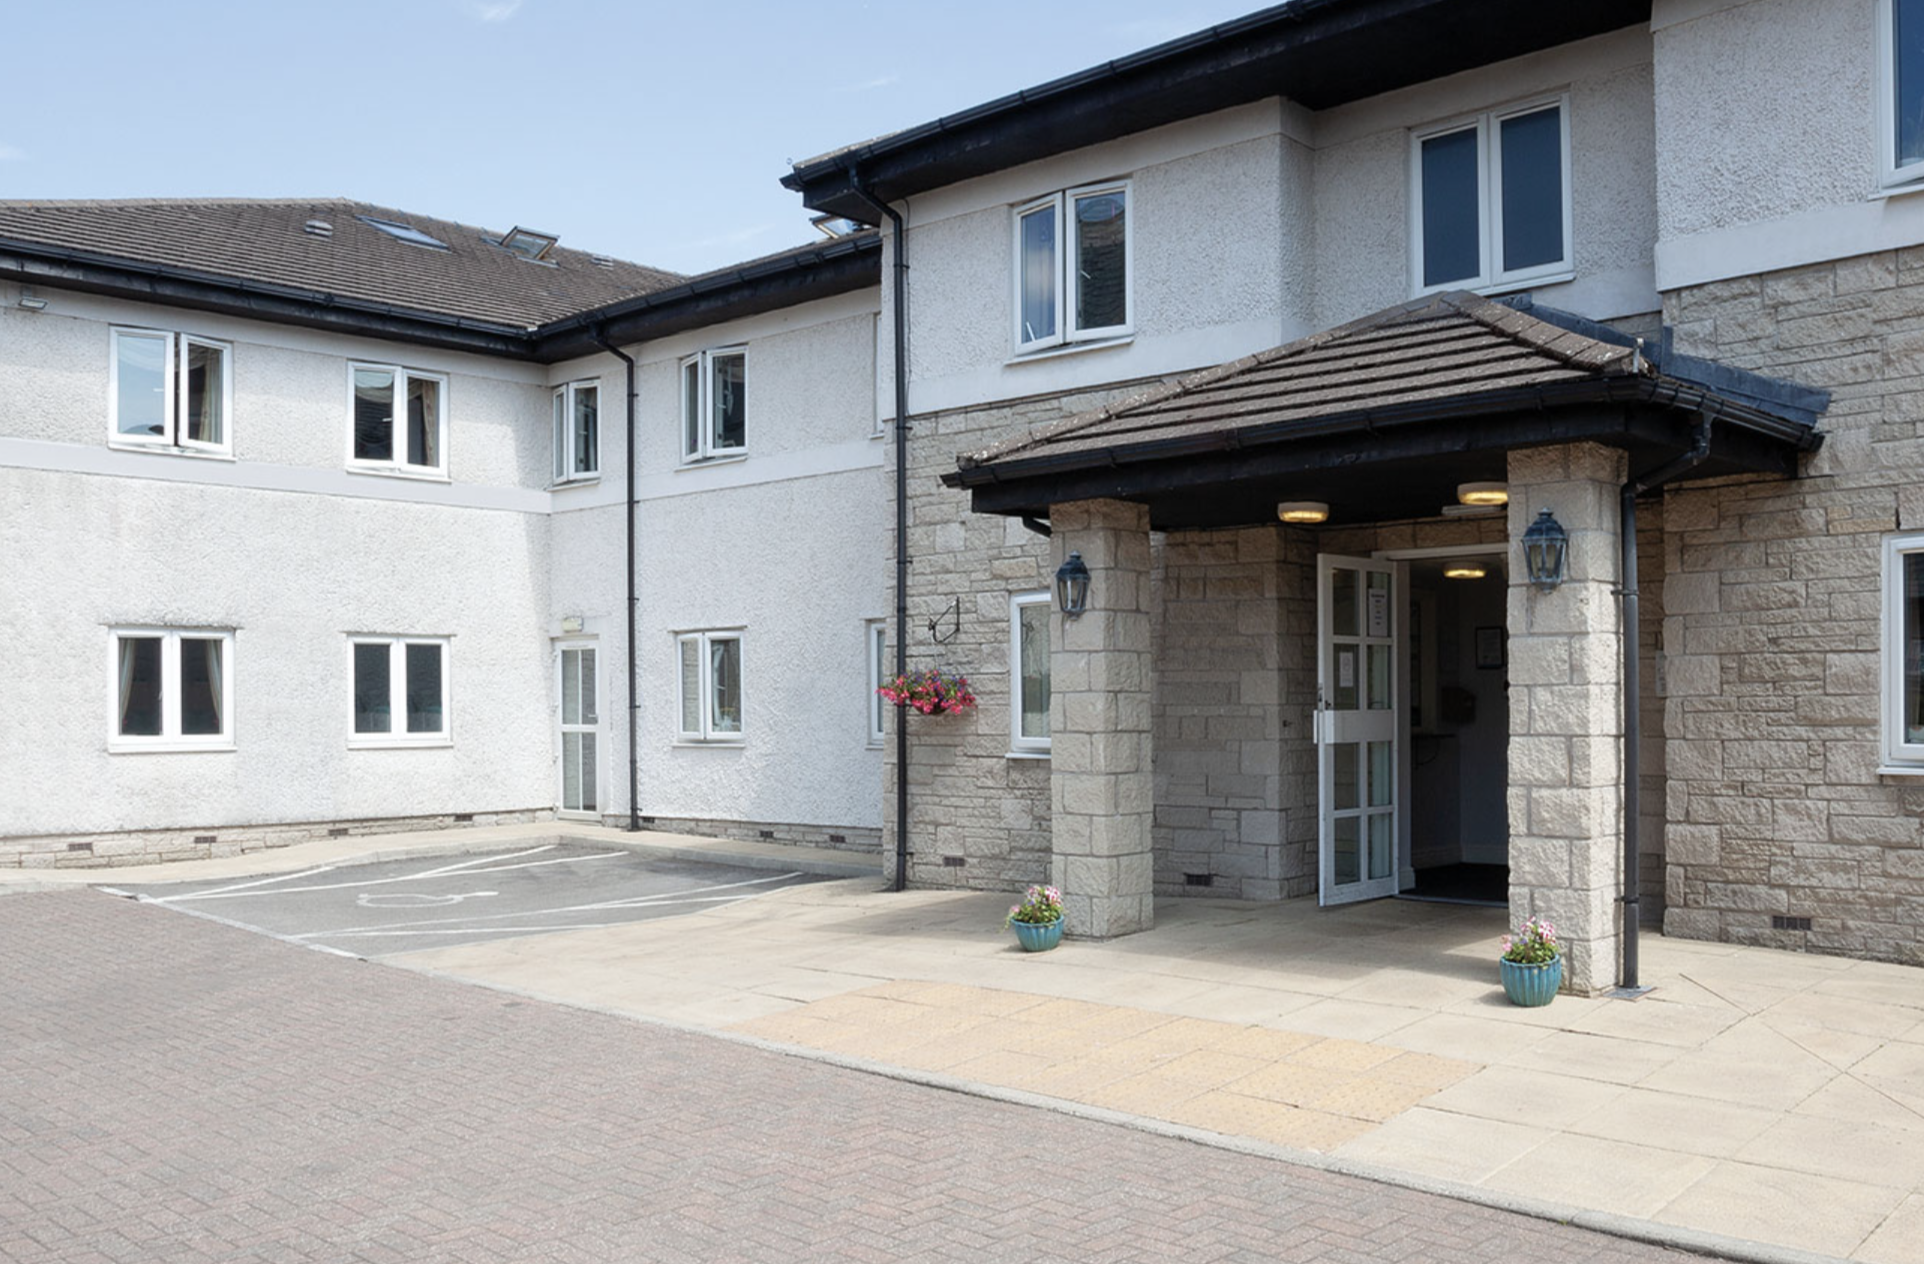 Exterior of Heron Hill care home in Kendal, Cumbria